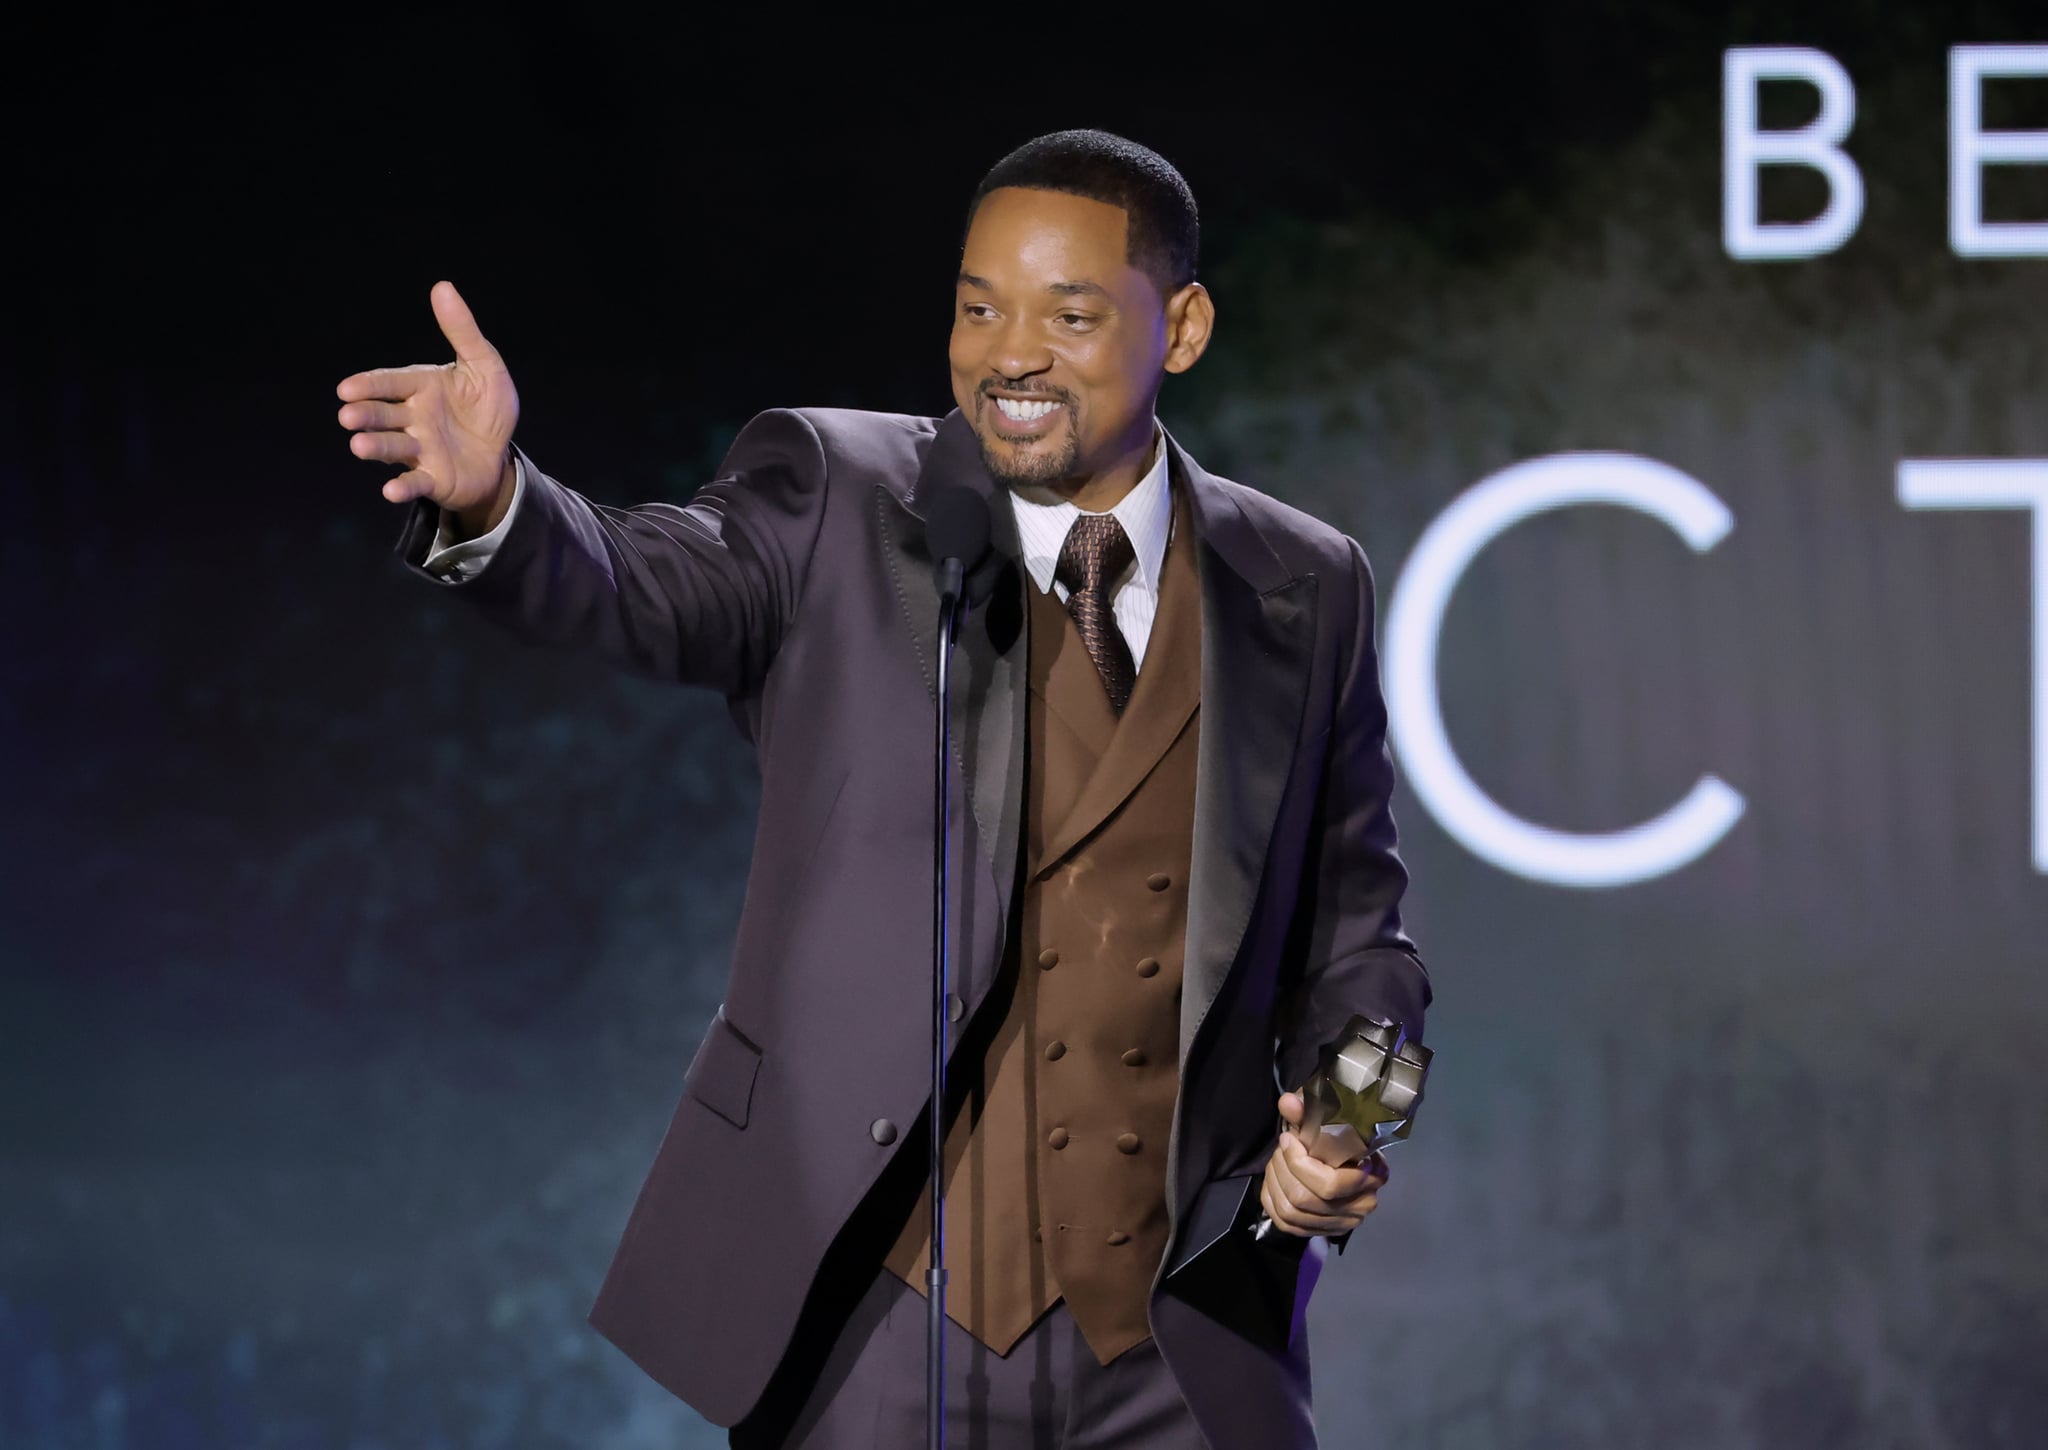 LOS ANGELES, CALIFORNIA - MARCH 13: Will Smith accepts the Best Actor award for 